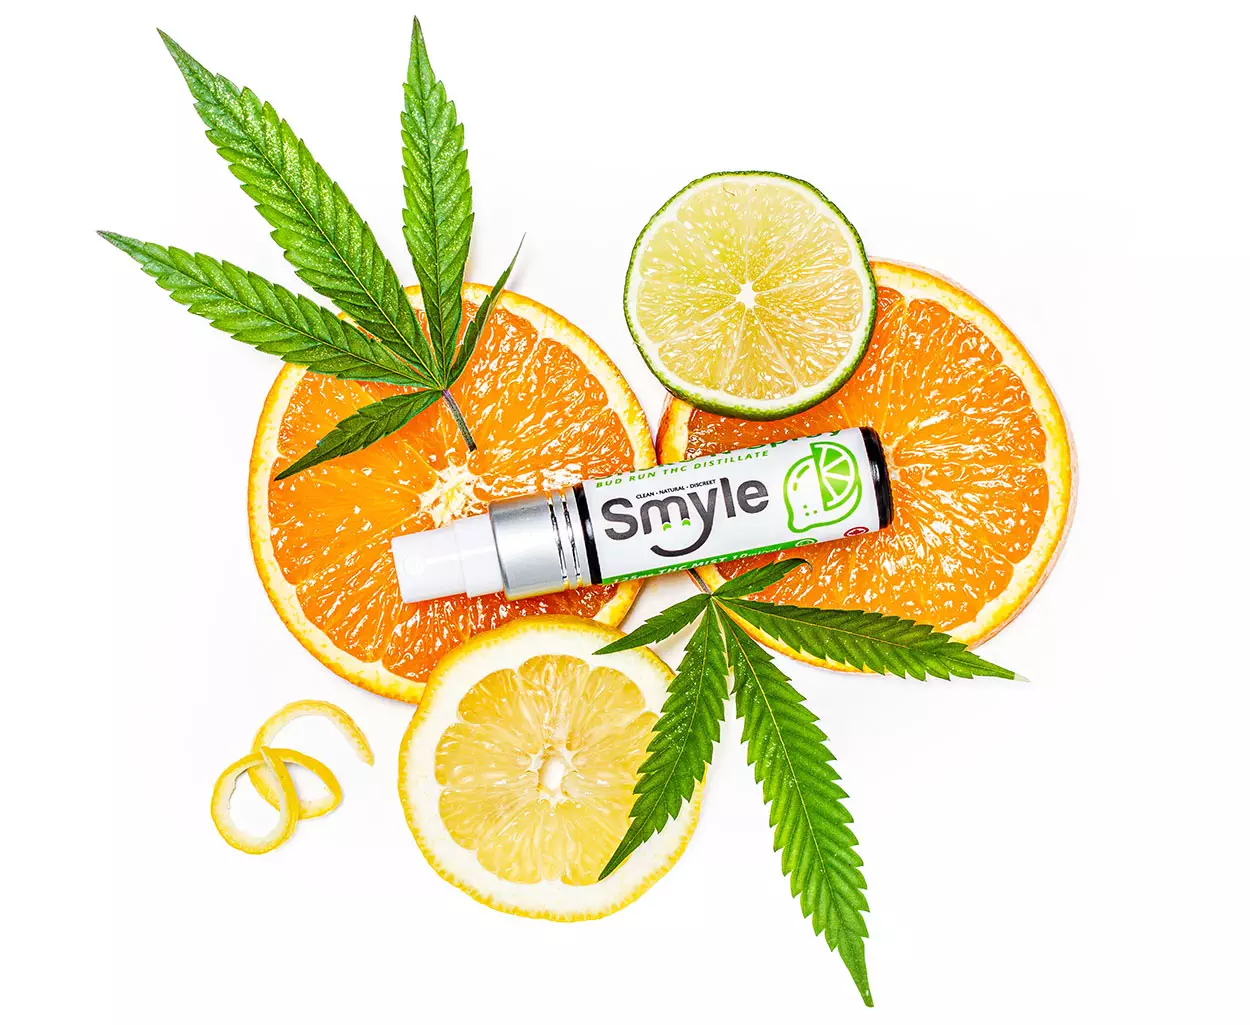 Smyle sublinual spray on citrus with cannabis leaves